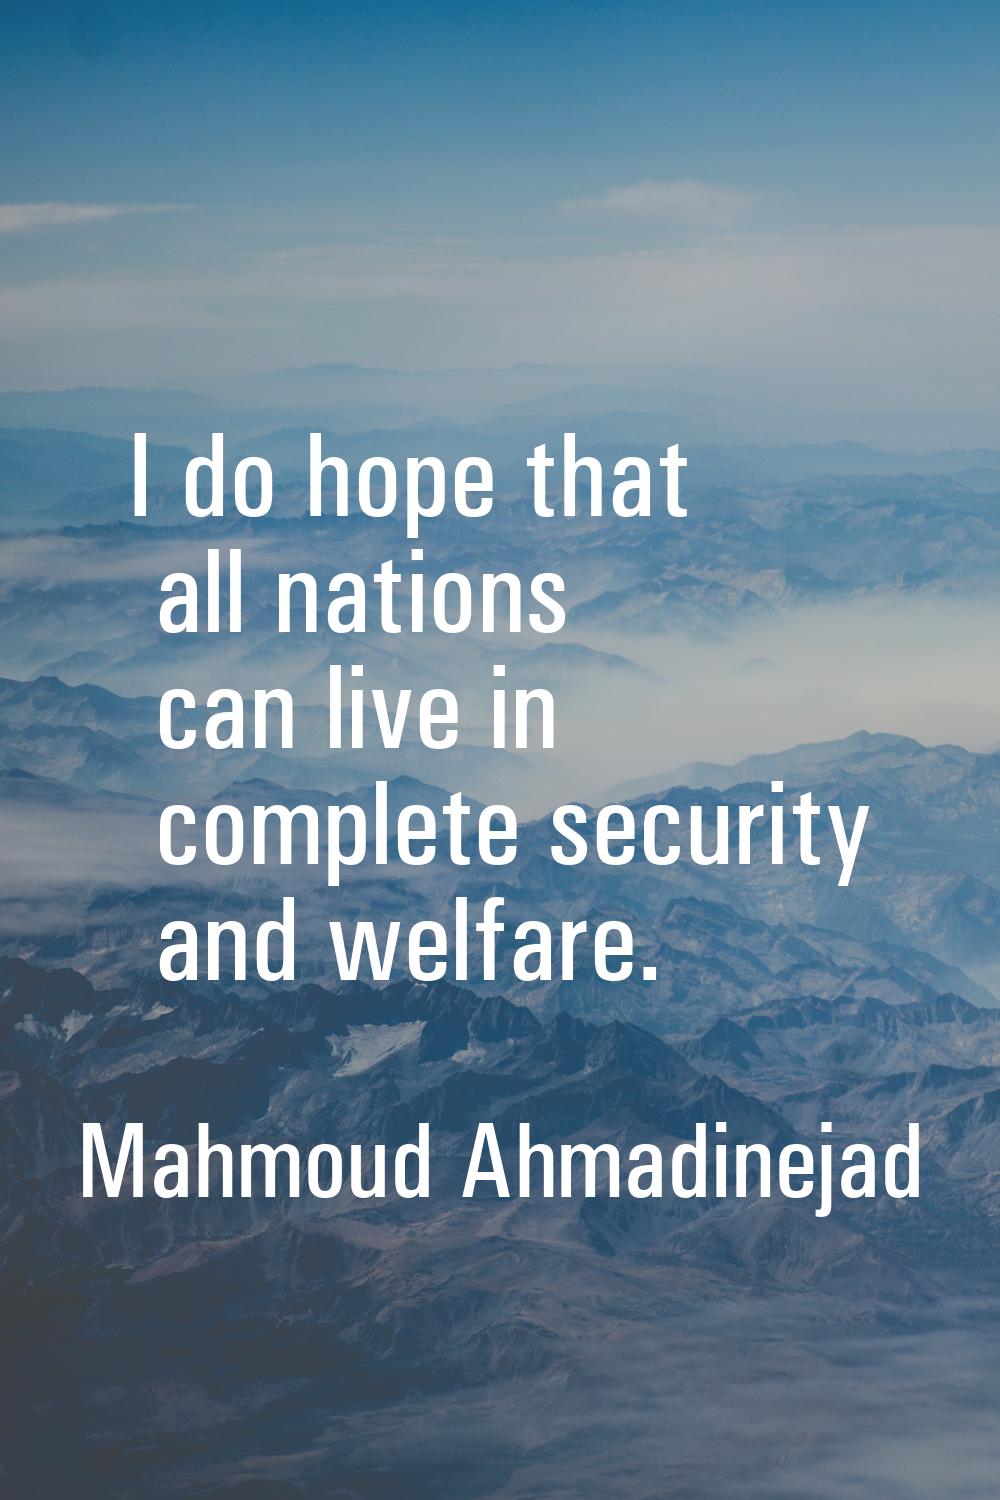 I do hope that all nations can live in complete security and welfare.